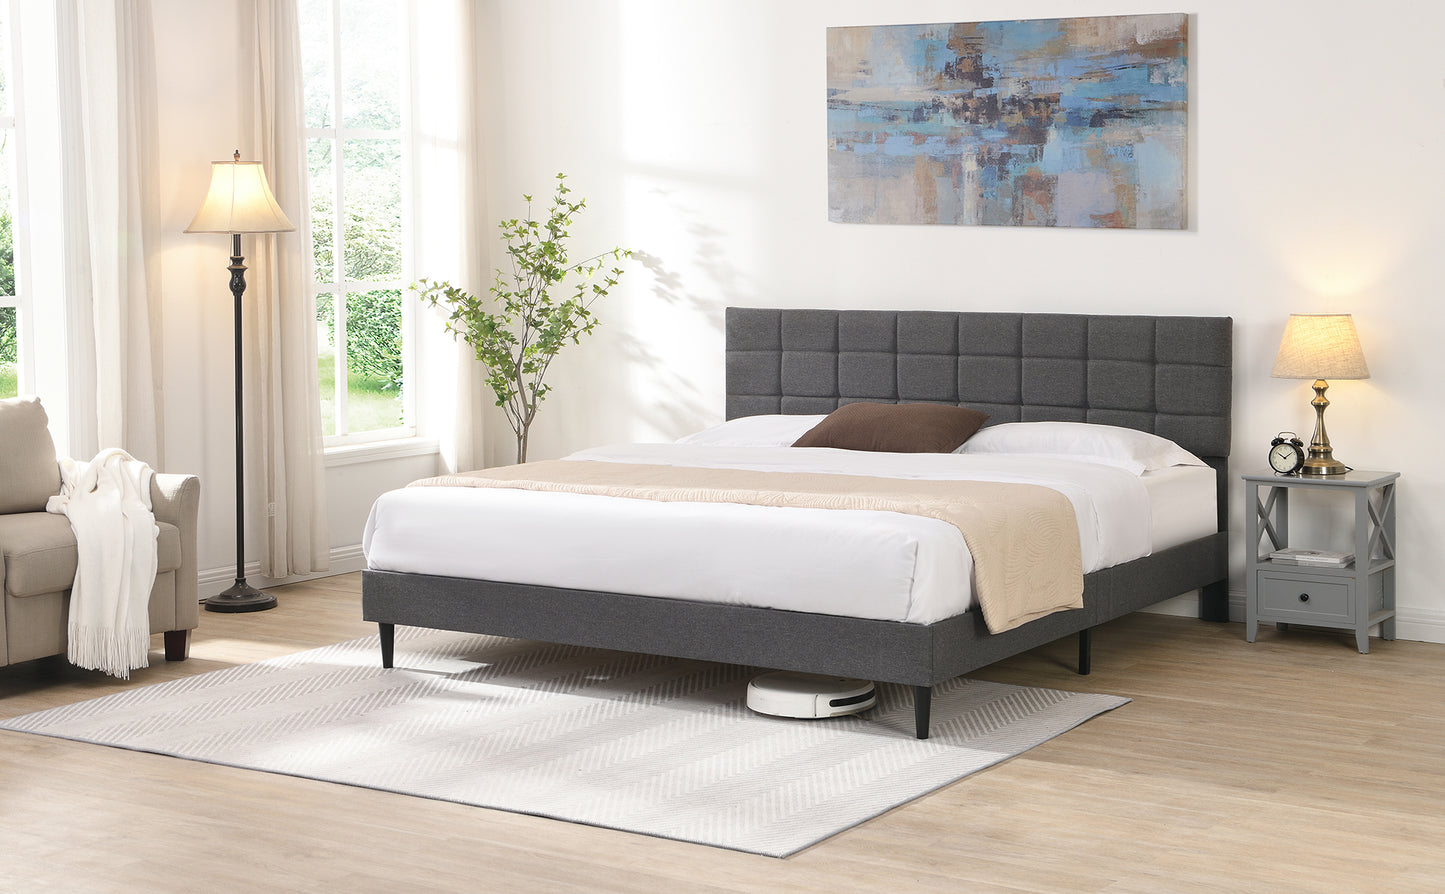 King Size Platform Bed Frame with Fabric Upholstered Headboard and Wooden Slats, No Box Spring Needed/Easy Assembly, Dark Grey